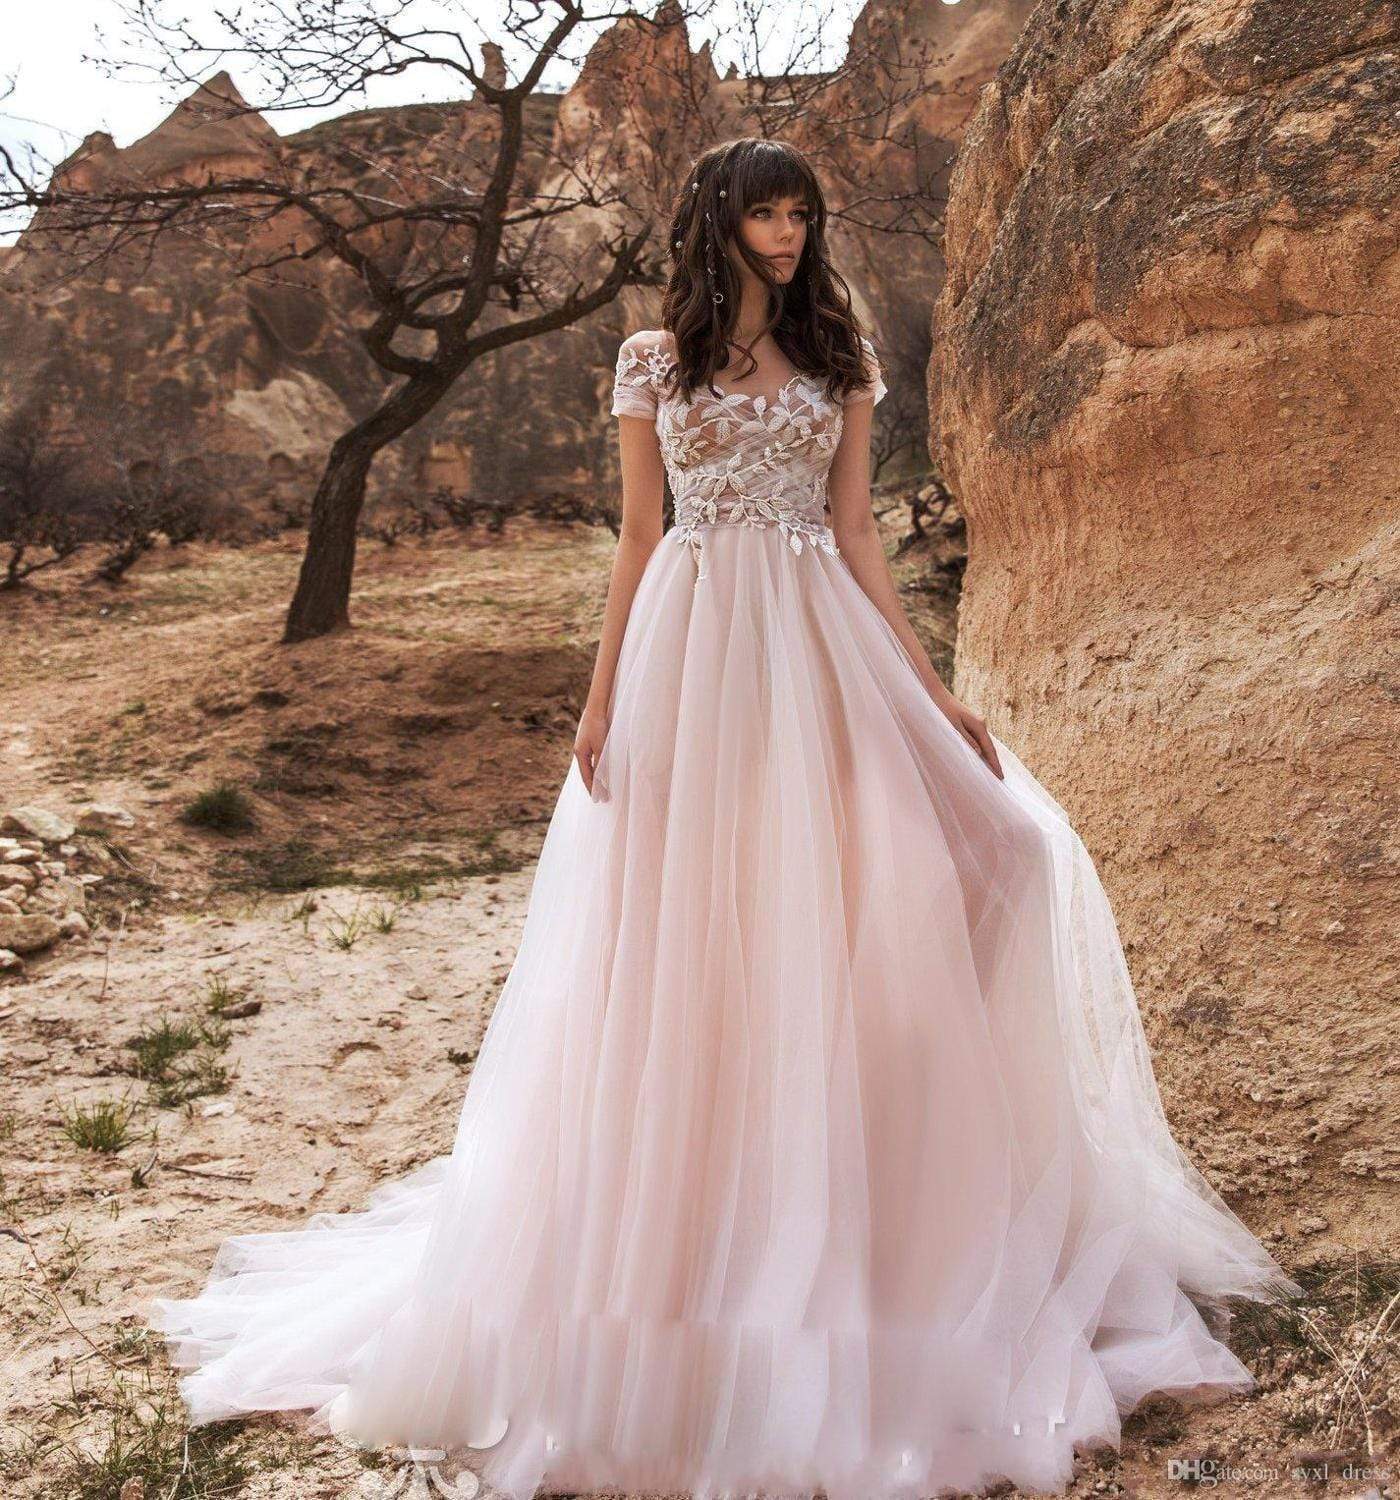 Long Sleeve Wedding Dress Pink Haute Couture Bridal Dress With Train